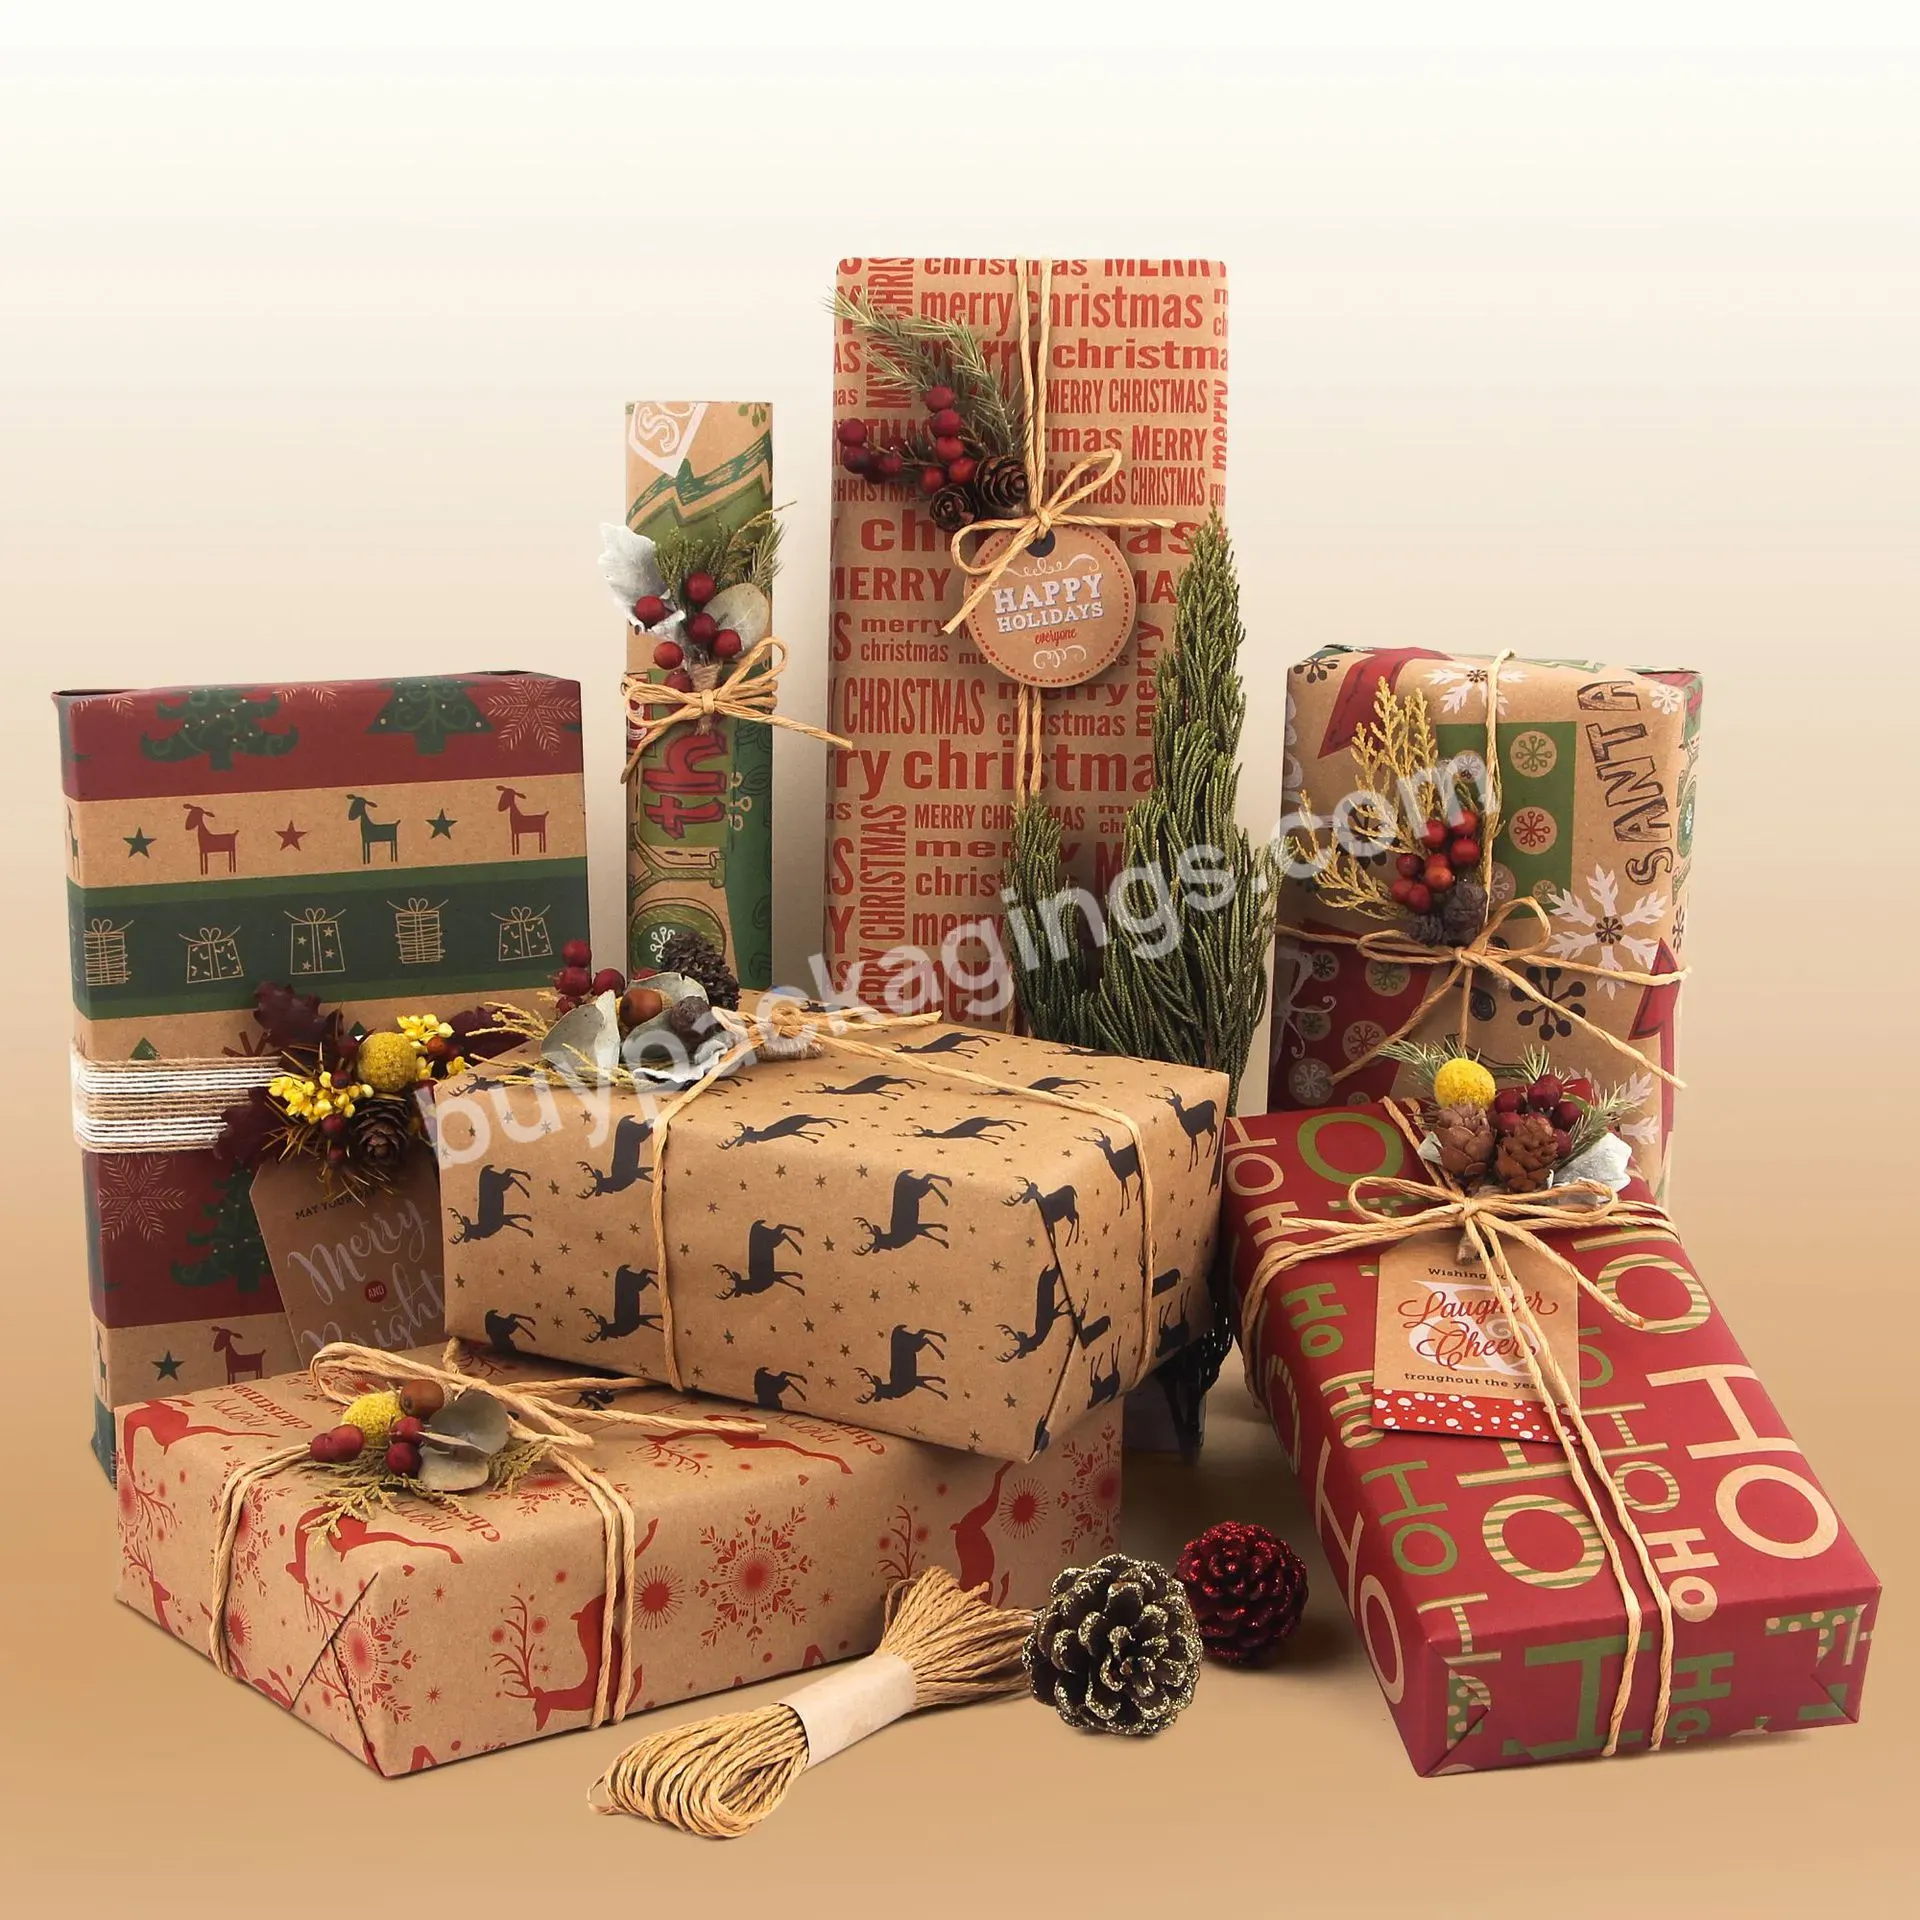 Wholesale Christmas Wrapping Paper Custom Beautiful Christmas Gift Wrapping Paper Rolls - Buy Wrapping Paper Christmas,Christmas Wrapping Paper Rolls,Christmas Wrapping Paper.